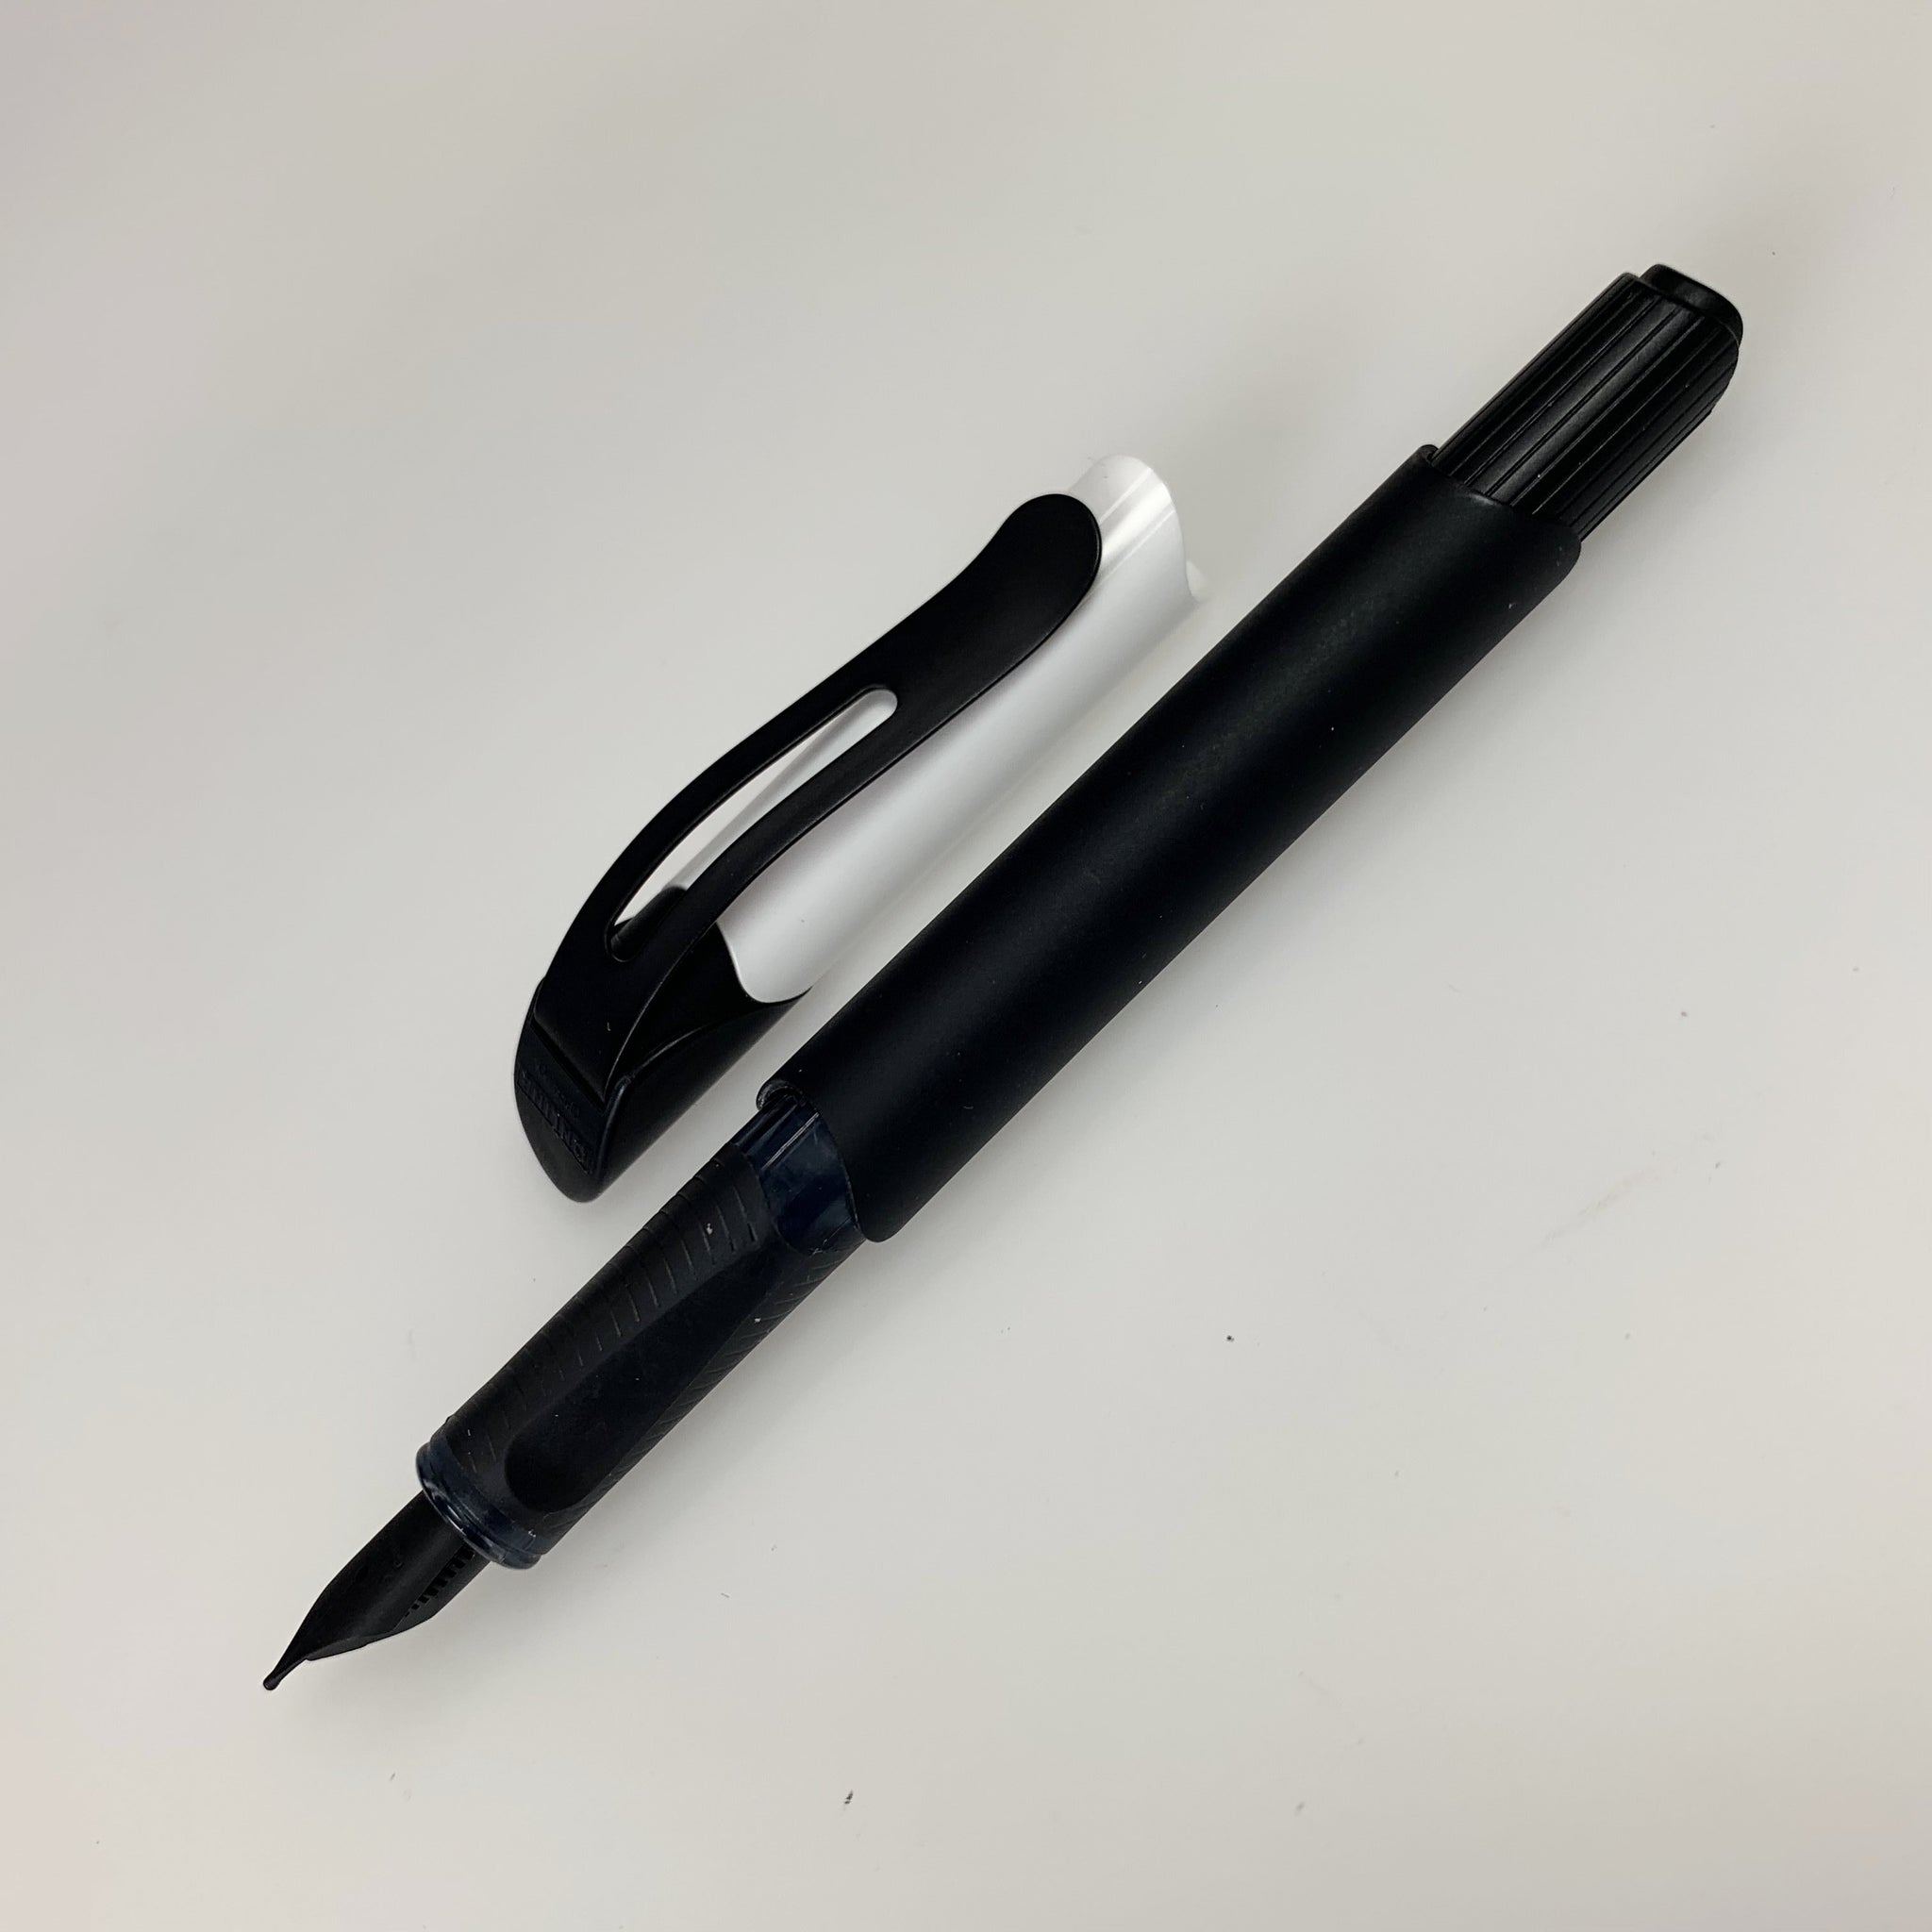 ONLINE of Germany ONLINE of Germany Academy Soft Touch Black/White Medium Fountain Pen freeshipping - RiNo Distribution